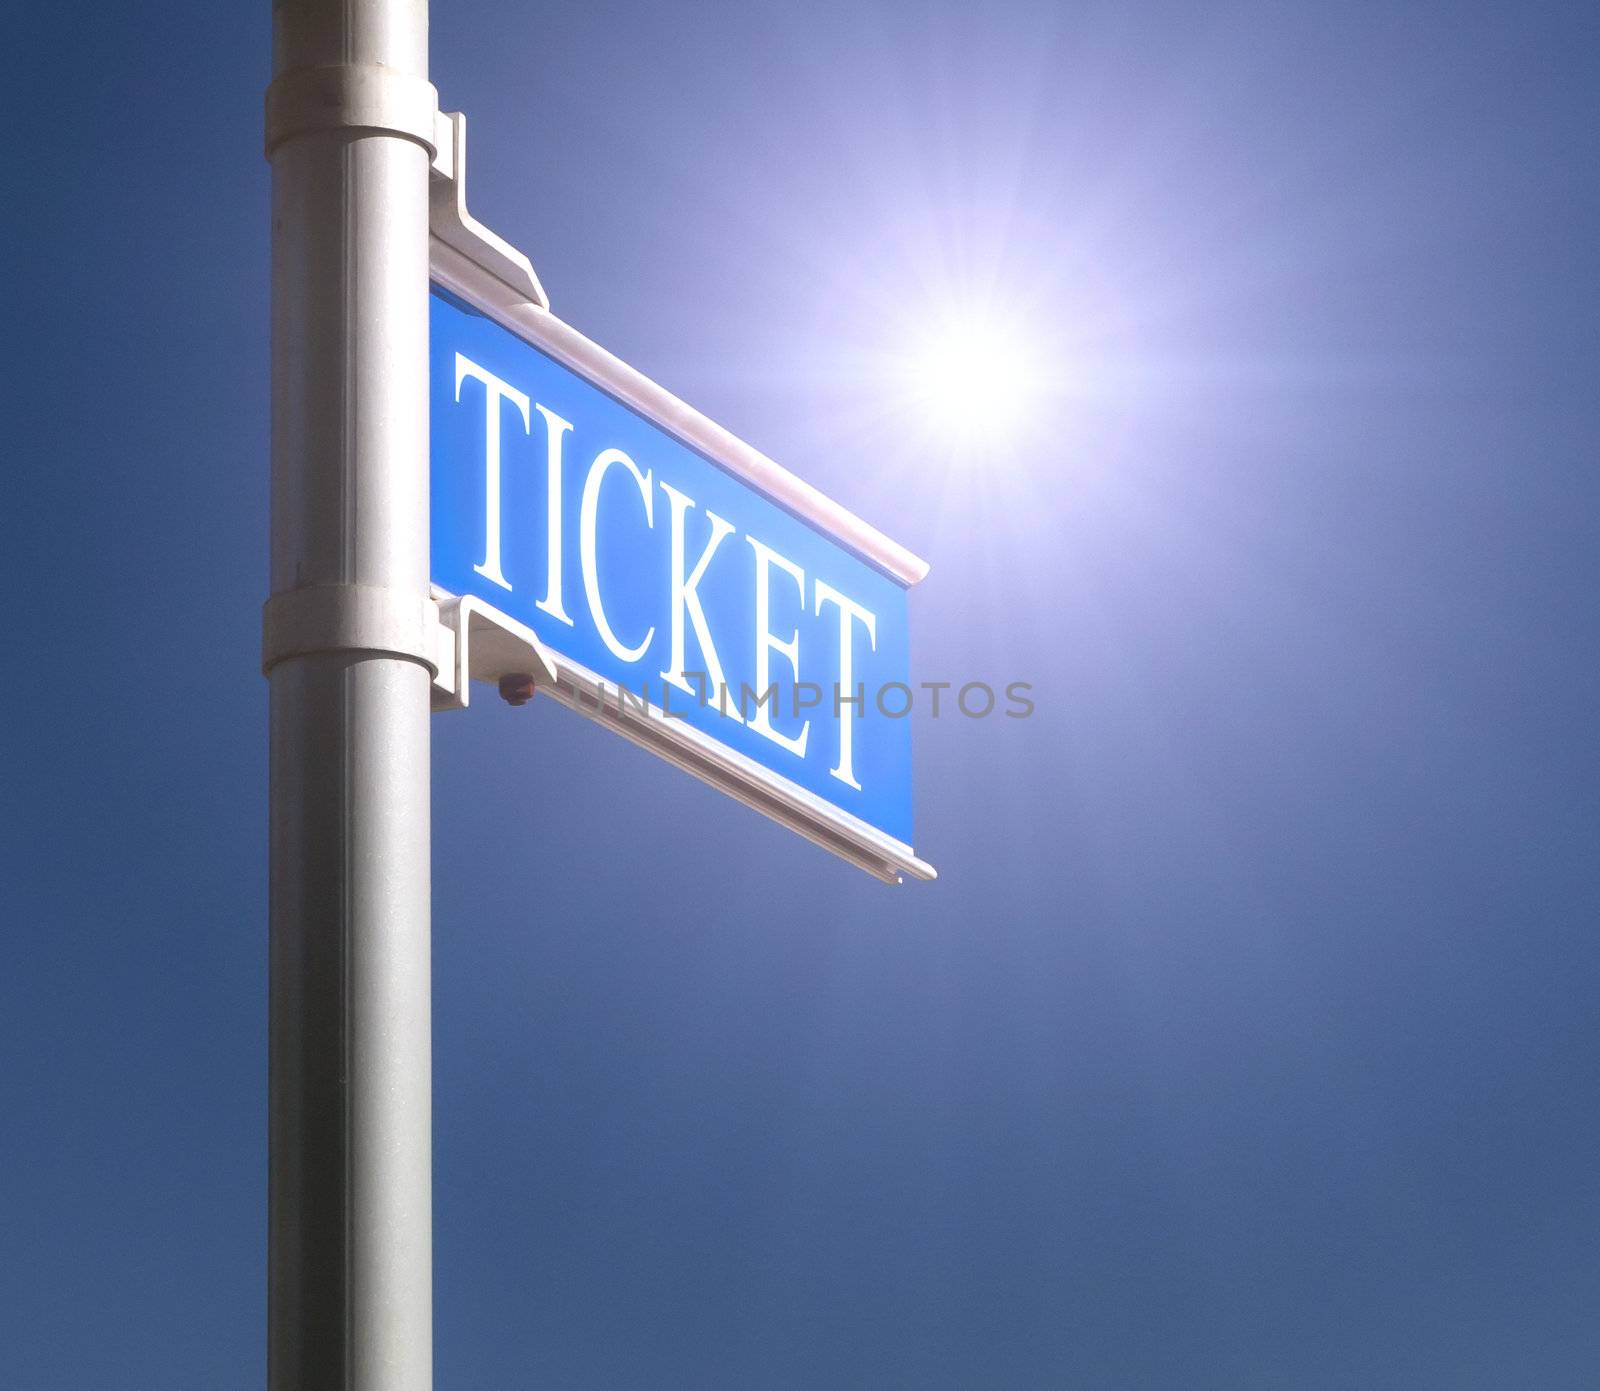 An image of a ticket sign with sun